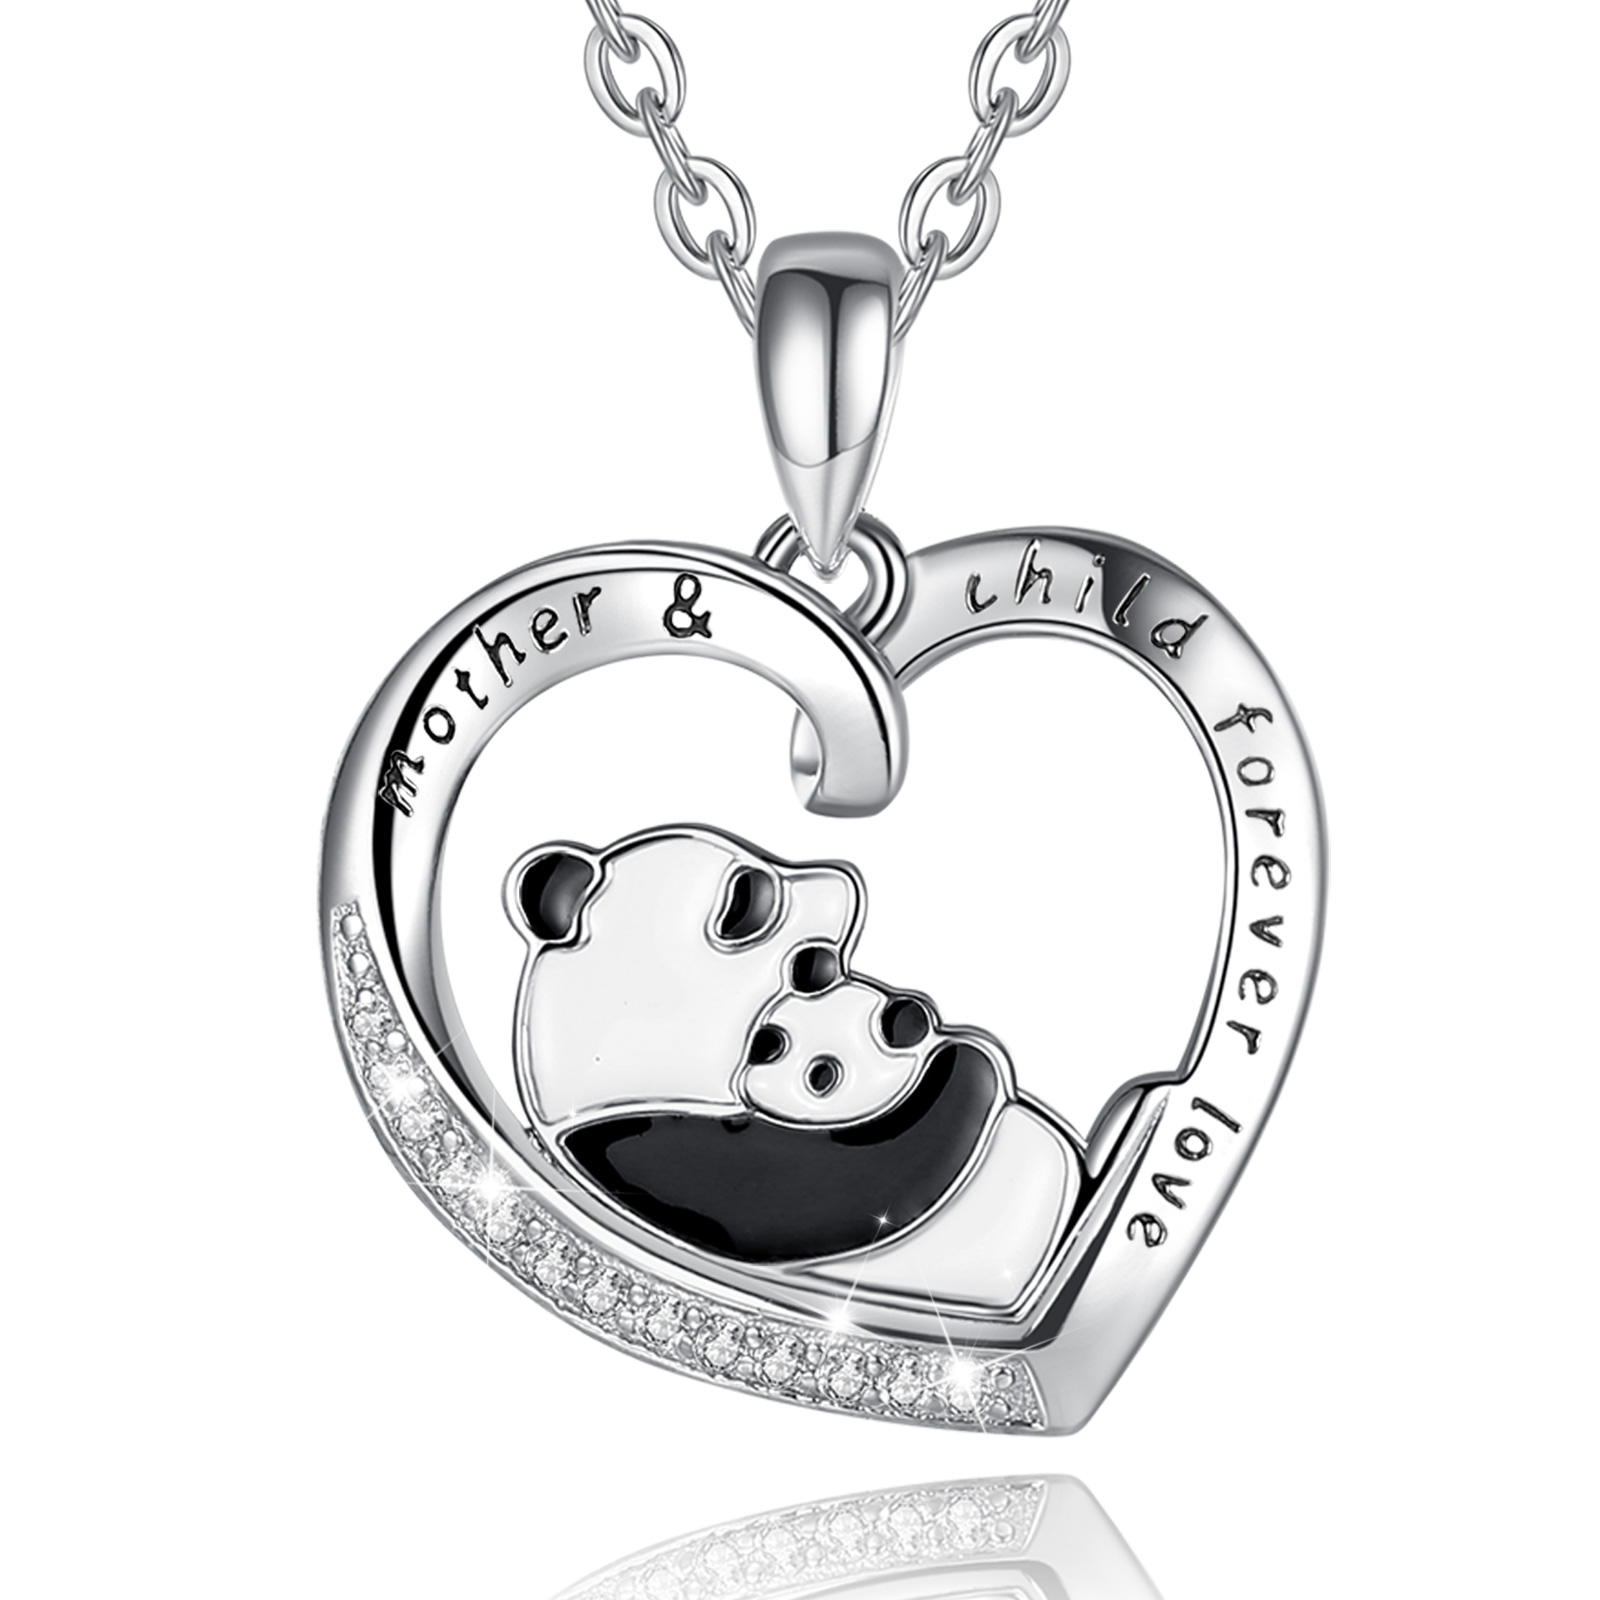 Merryshine Jewelry Best Gift S925 Sterling Silver Panda Mom and baby Necklaces for Women